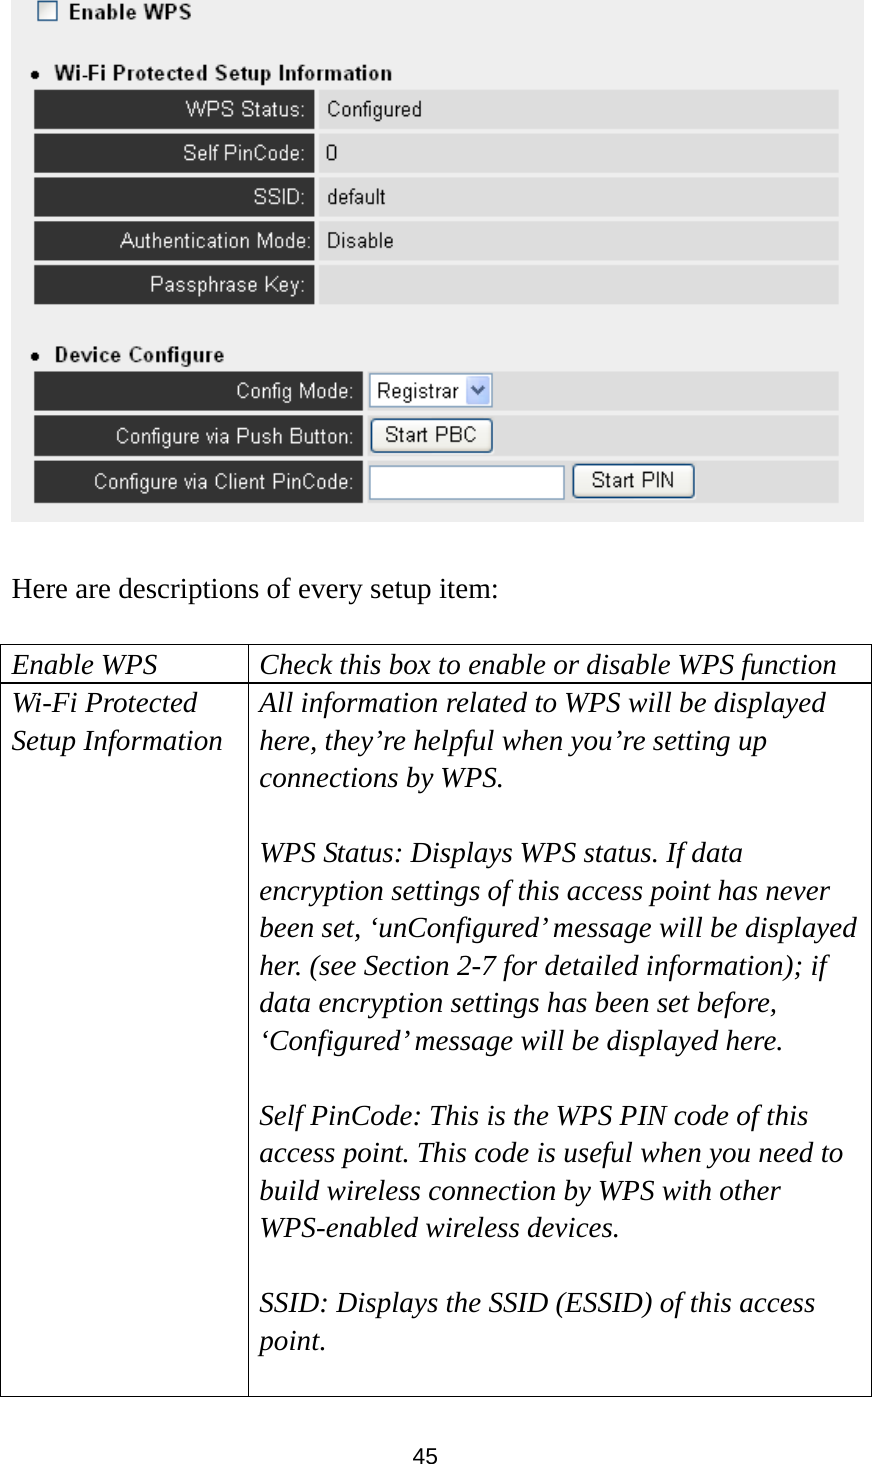 45   Here are descriptions of every setup item:  Enable WPS  Check this box to enable or disable WPS function Wi-Fi Protected Setup Information All information related to WPS will be displayed here, they’re helpful when you’re setting up connections by WPS.  WPS Status: Displays WPS status. If data encryption settings of this access point has never been set, ‘unConfigured’ message will be displayed her. (see Section 2-7 for detailed information); if data encryption settings has been set before, ‘Configured’ message will be displayed here.    Self PinCode: This is the WPS PIN code of this access point. This code is useful when you need to build wireless connection by WPS with other WPS-enabled wireless devices.  SSID: Displays the SSID (ESSID) of this access point.  